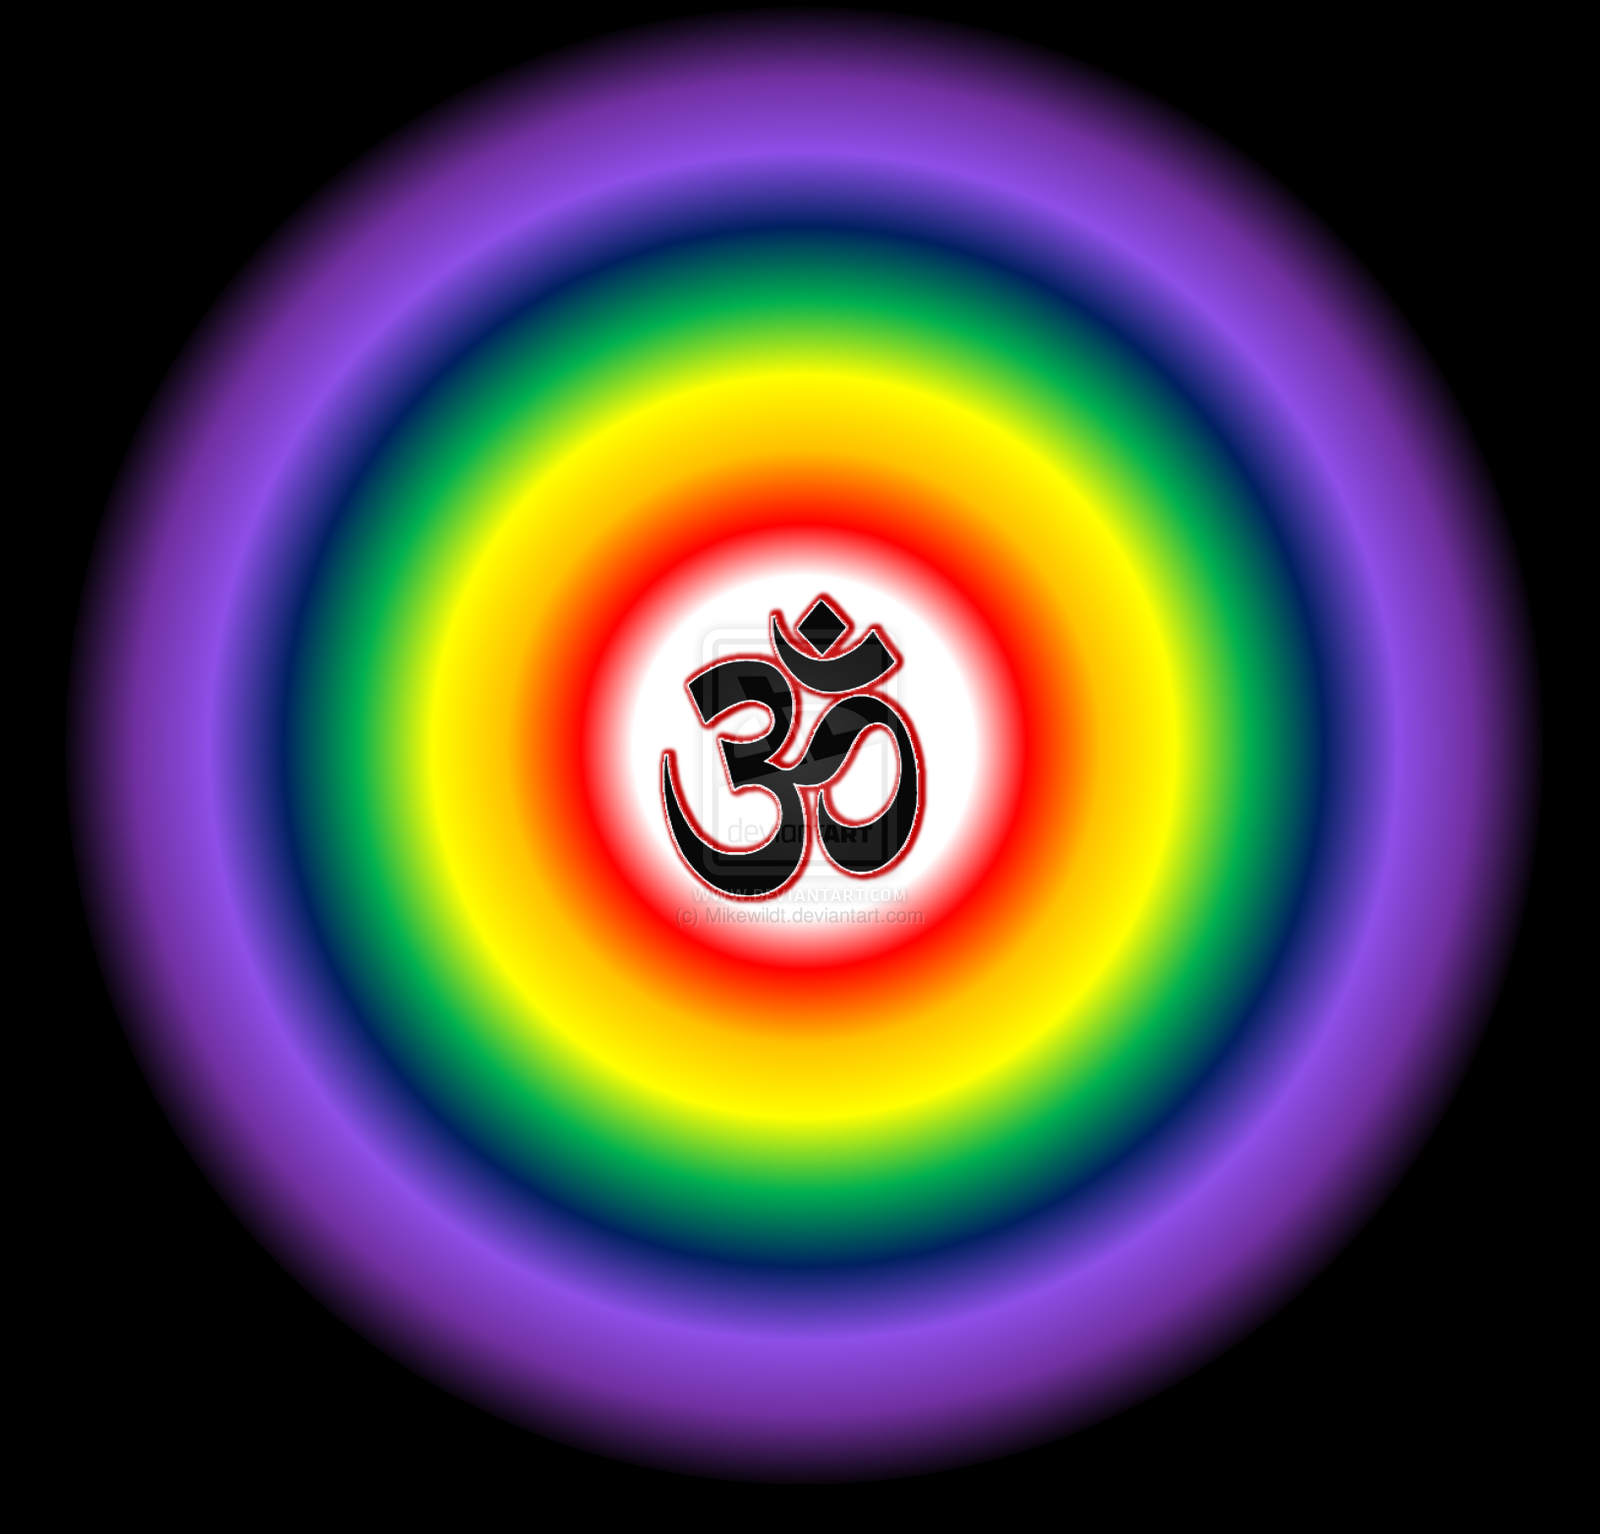 Om symbol with background hd images Only hd wallpapers 1600x1534